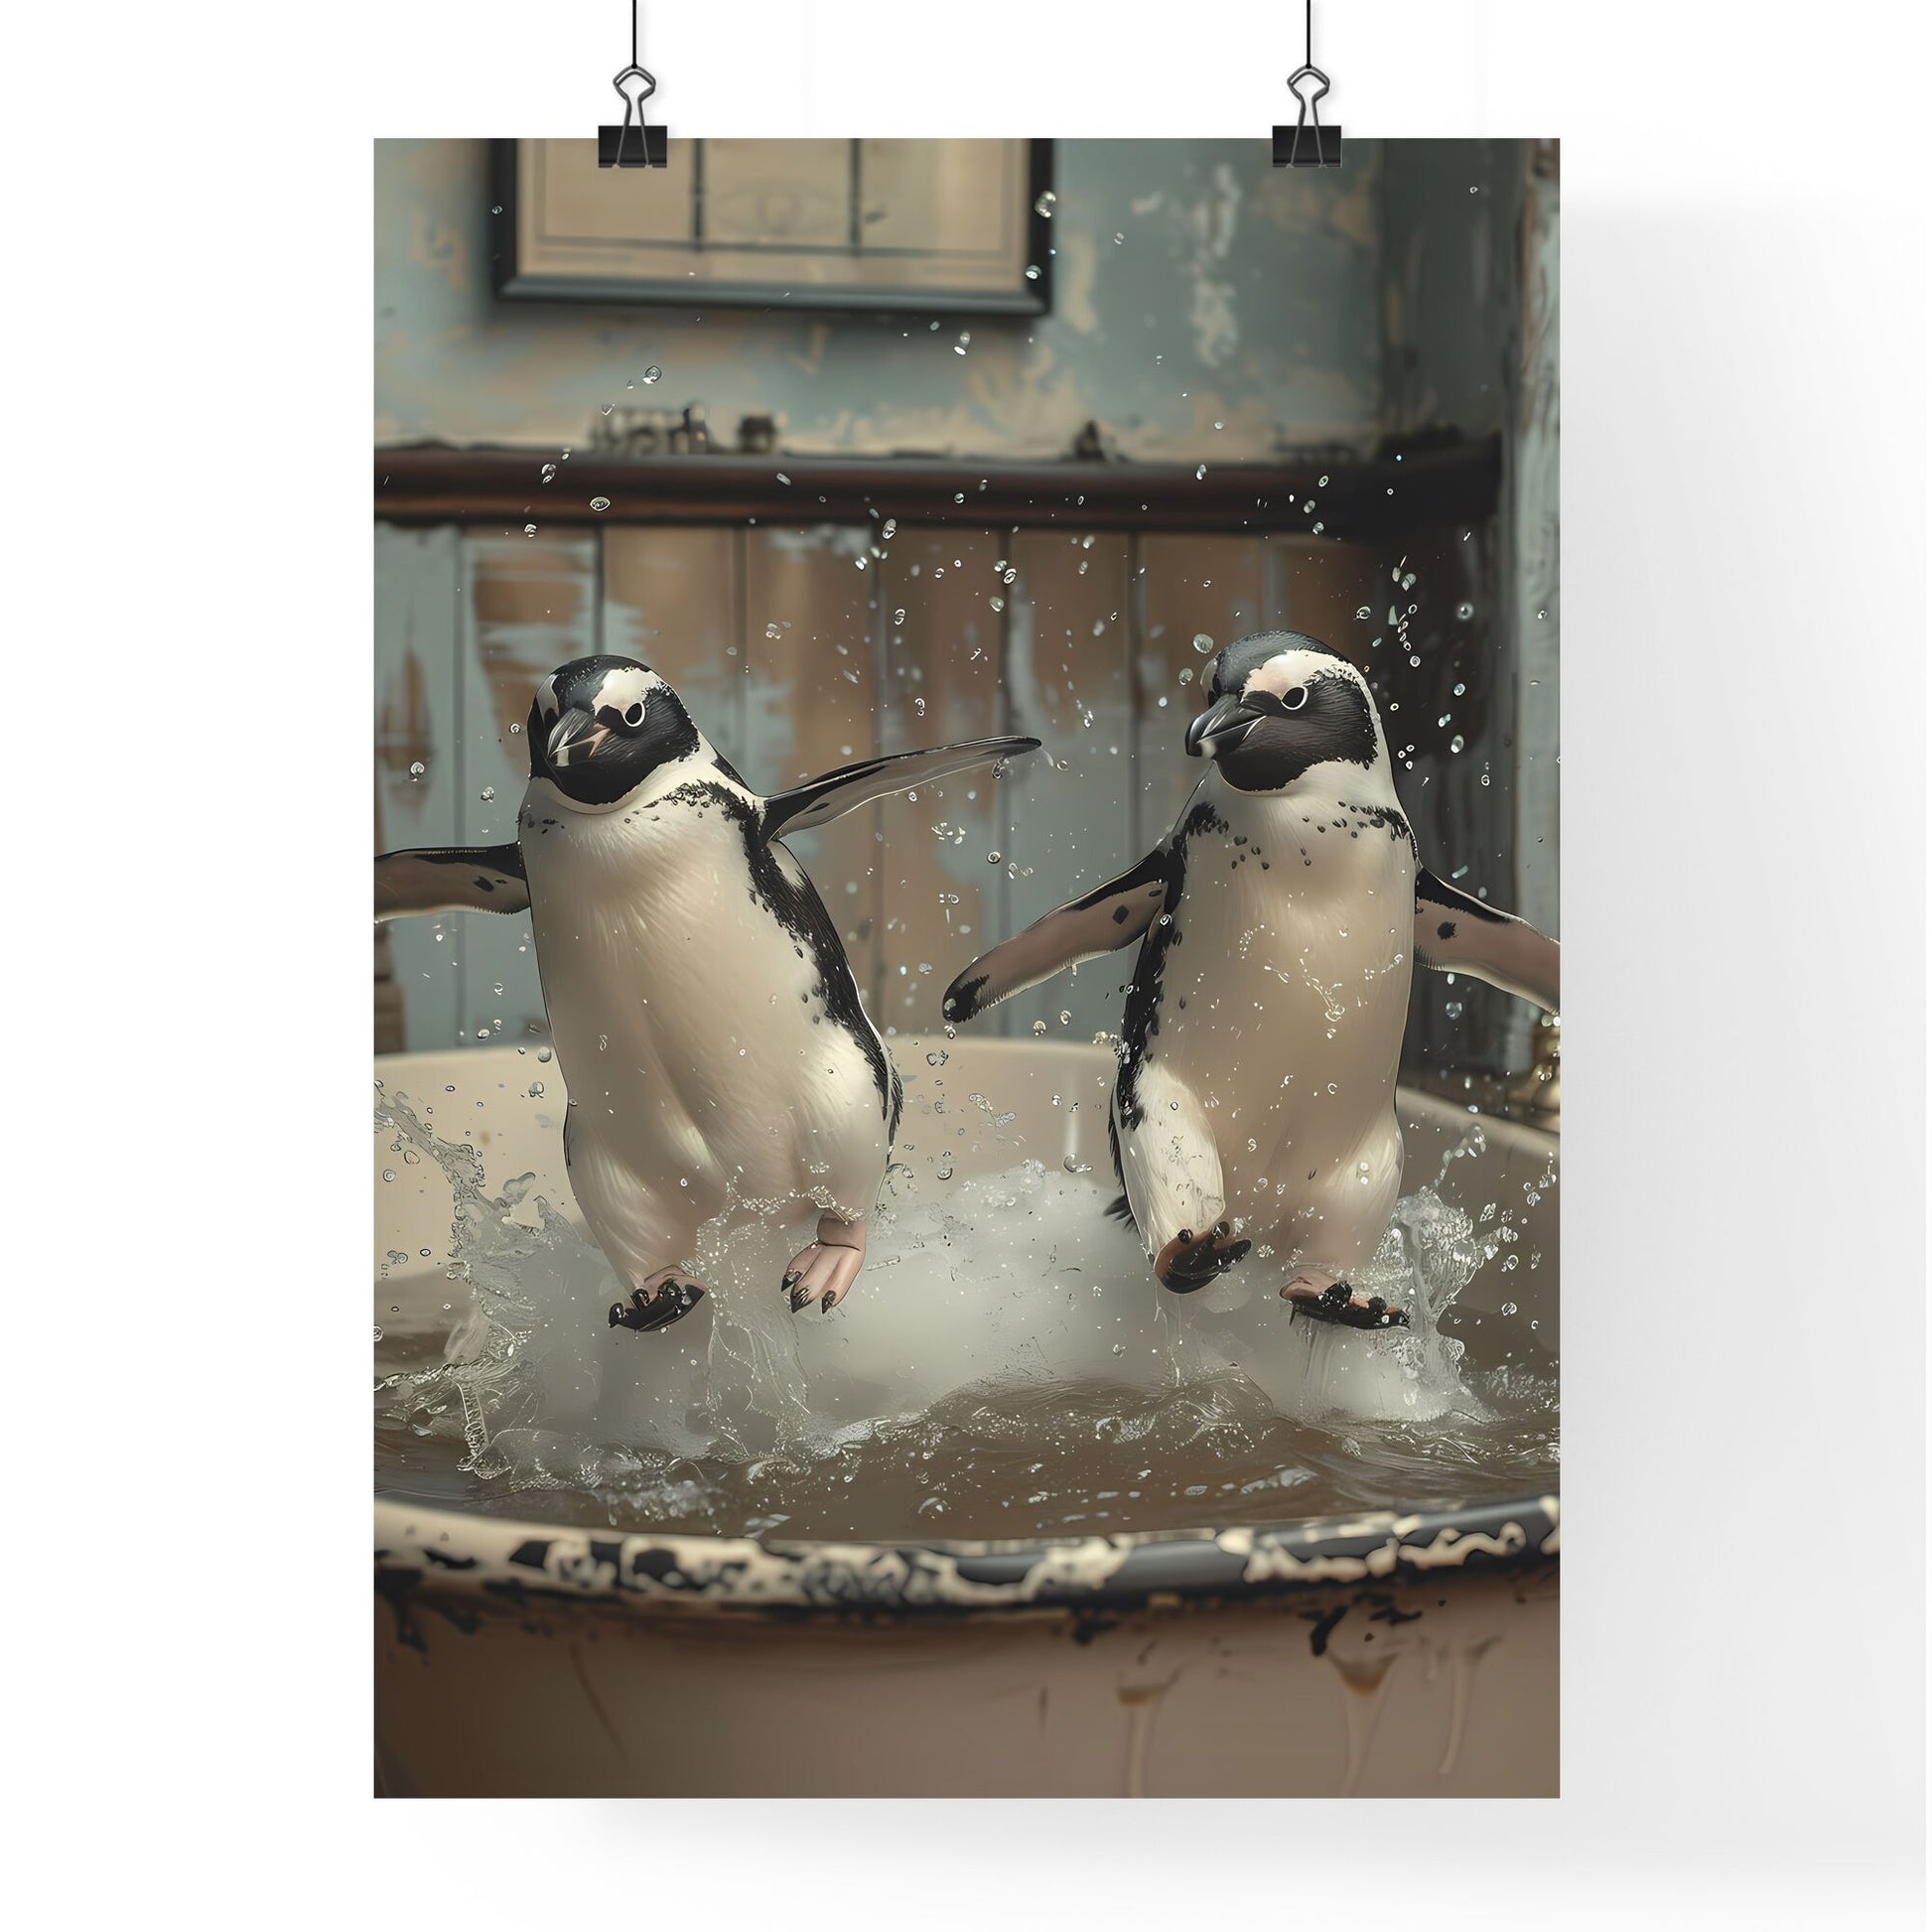 Wo penguins jump in a bathtub playing with each other, a storybook illustration, featured on cg society, art photography, whimsical, behance hd, storybook illustration black and white vintage - two penguins jumping into a tub of water Default Title